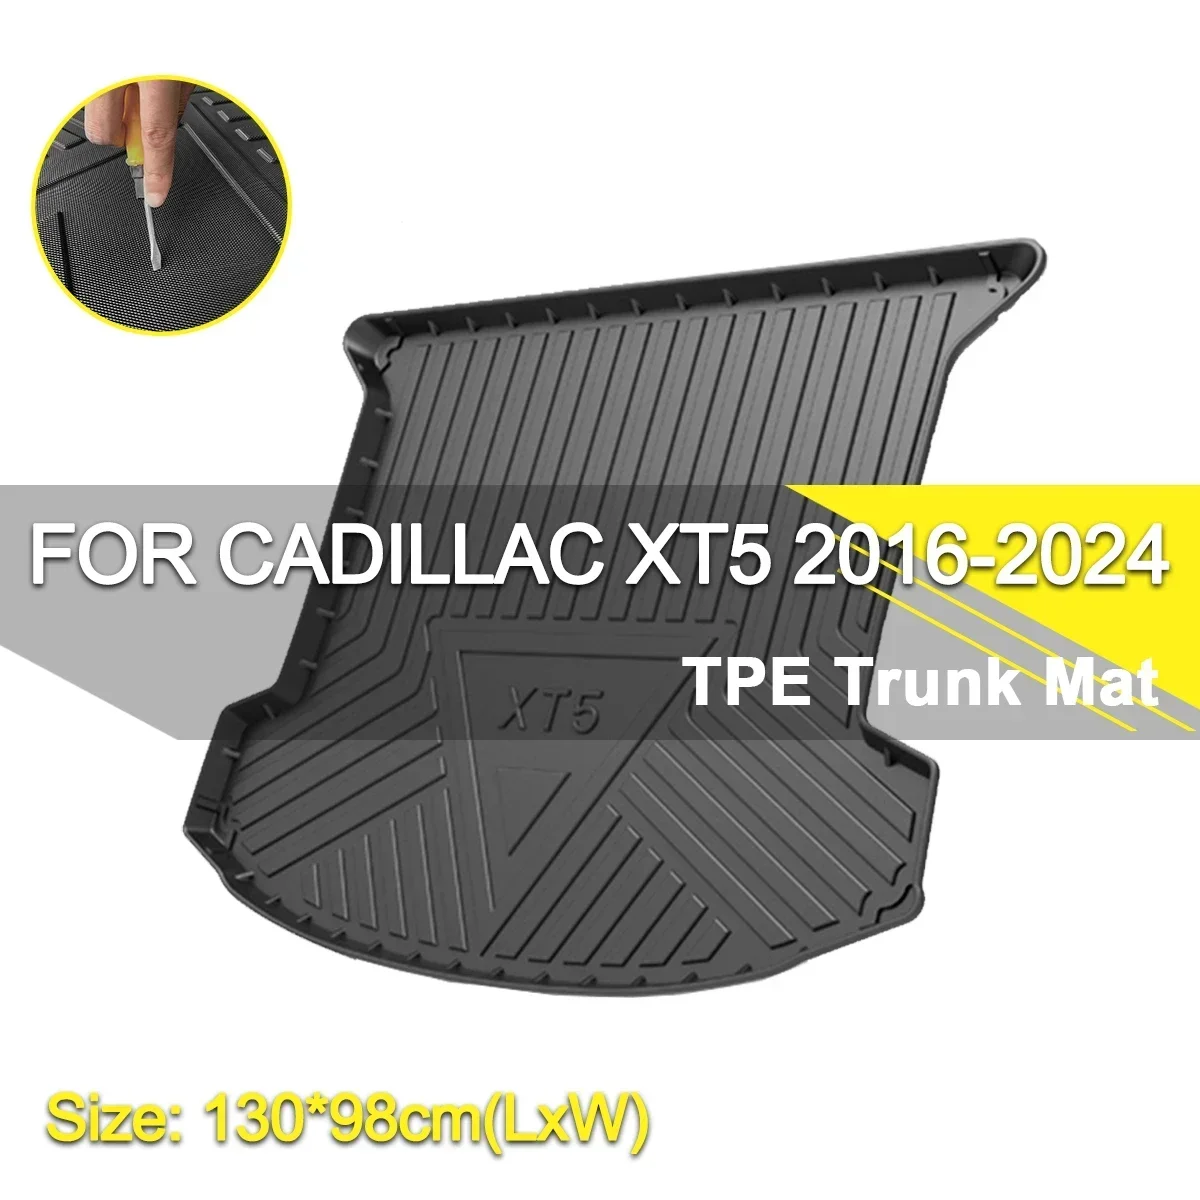 

Car Rear Trunk Cover Mat Waterproof Non-Slip Rubber TPE Cargo Liner Accessories For Cadillac XT5 2016-2024